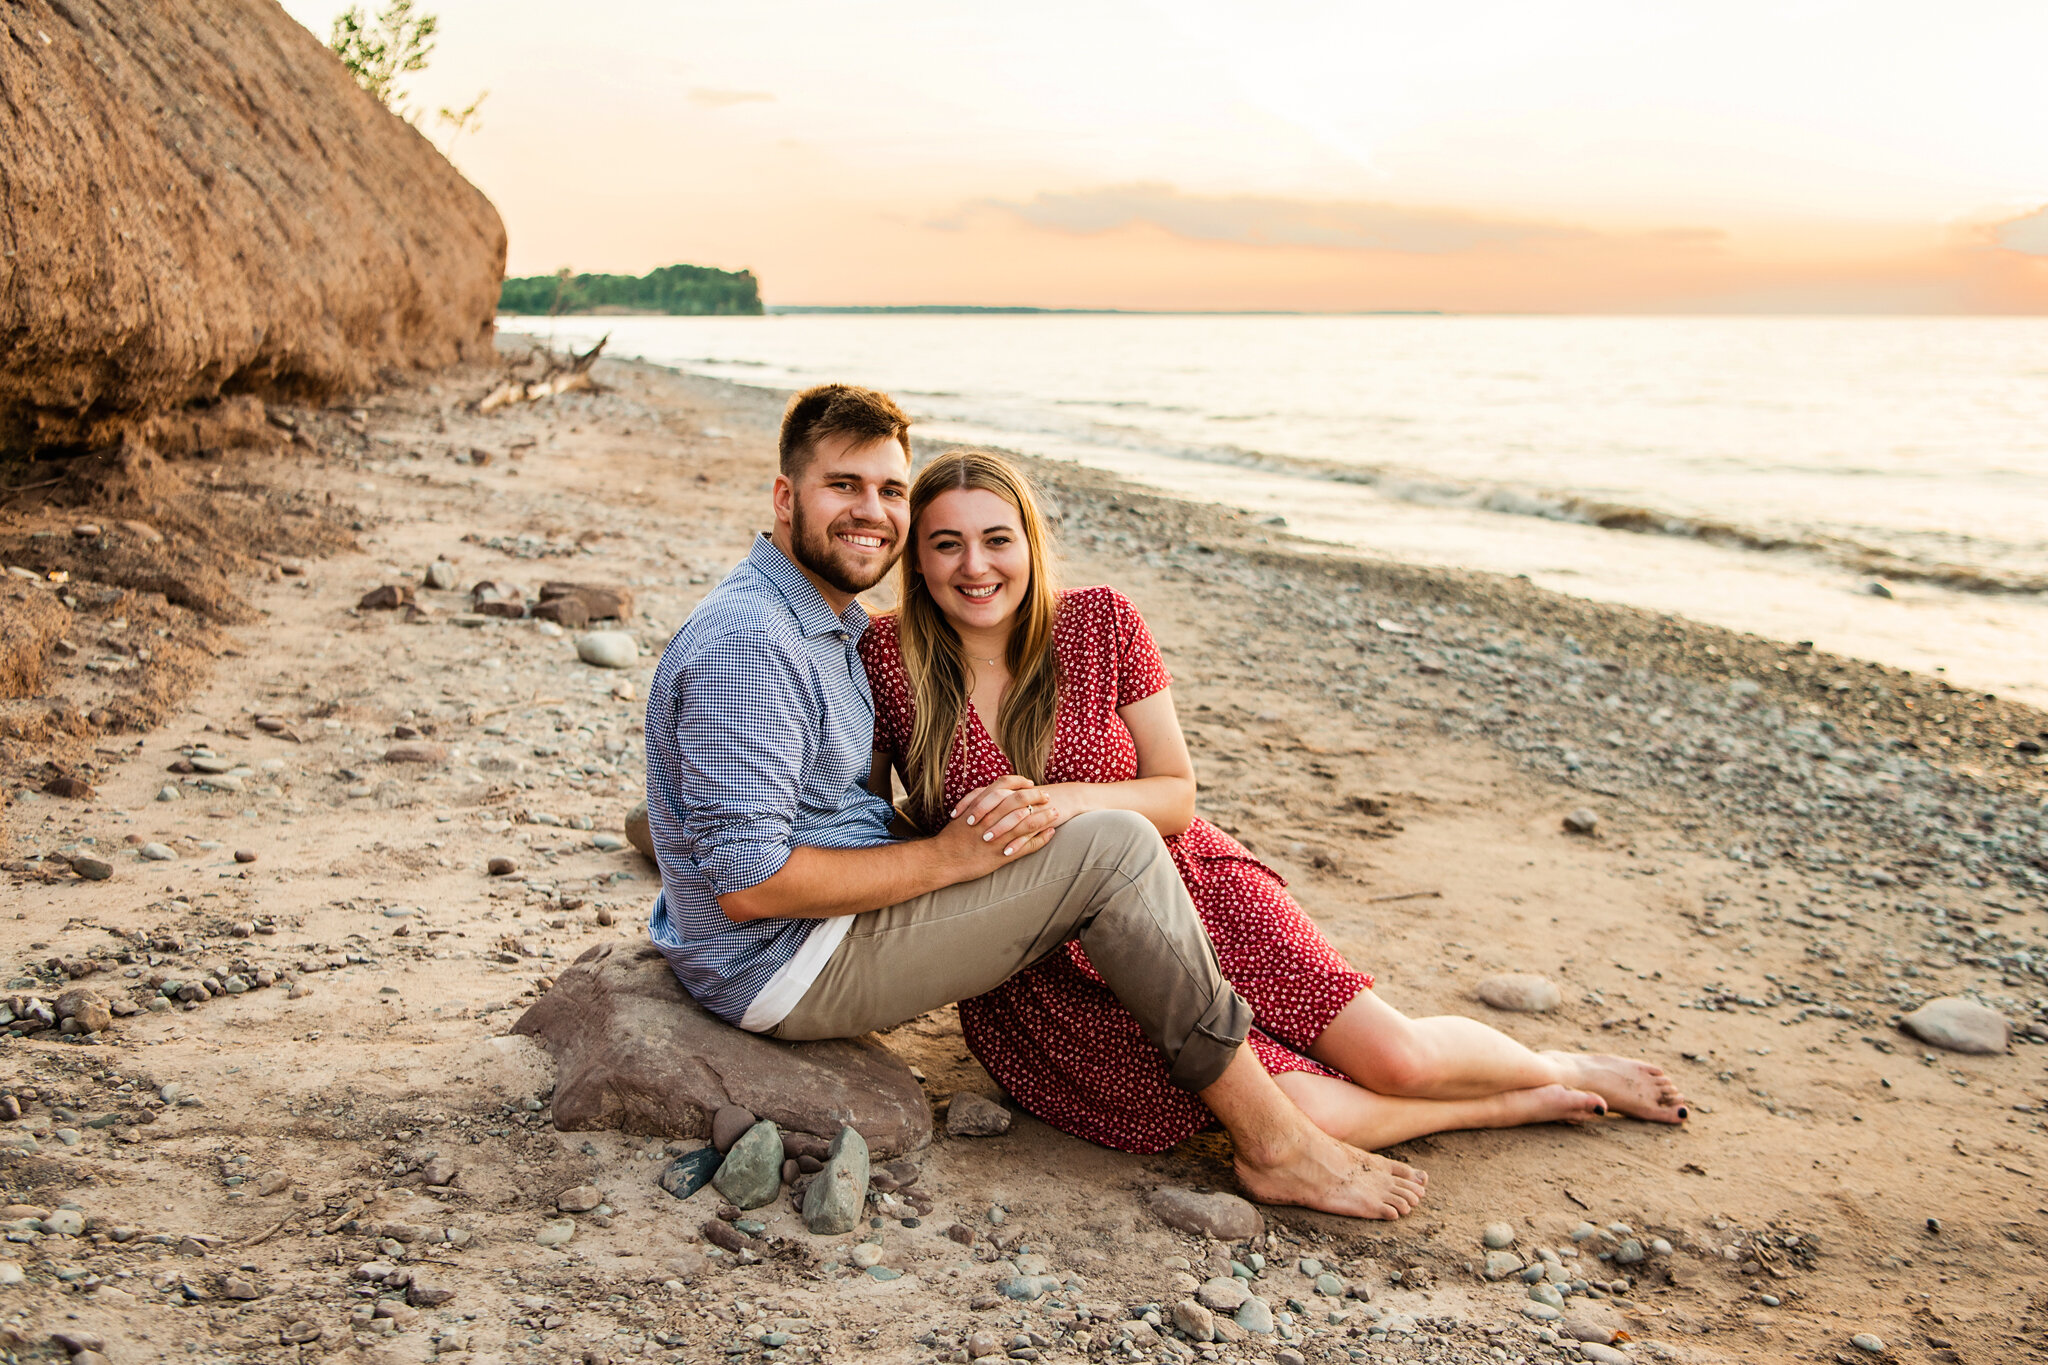 Chimney_Bluffs_State_Park_Rochester_Engagement_Session_JILL_STUDIO_Rochester_NY_Photographer_7219.jpg